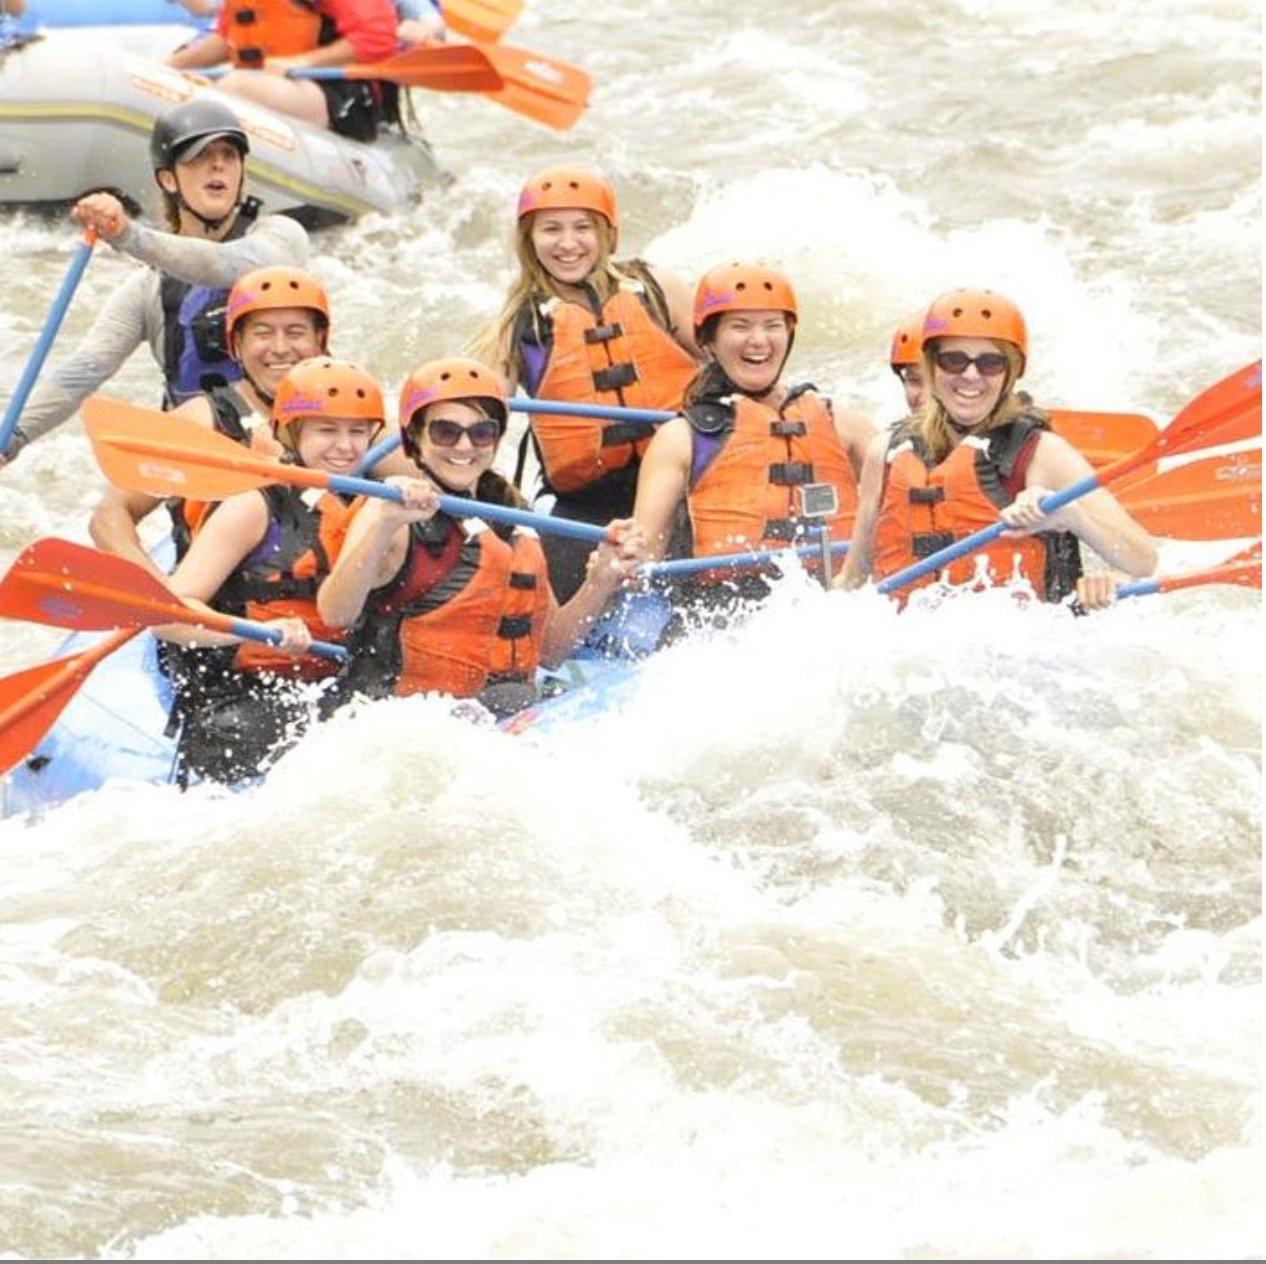 Rafting on the Arkansas River in Cañon City, CO